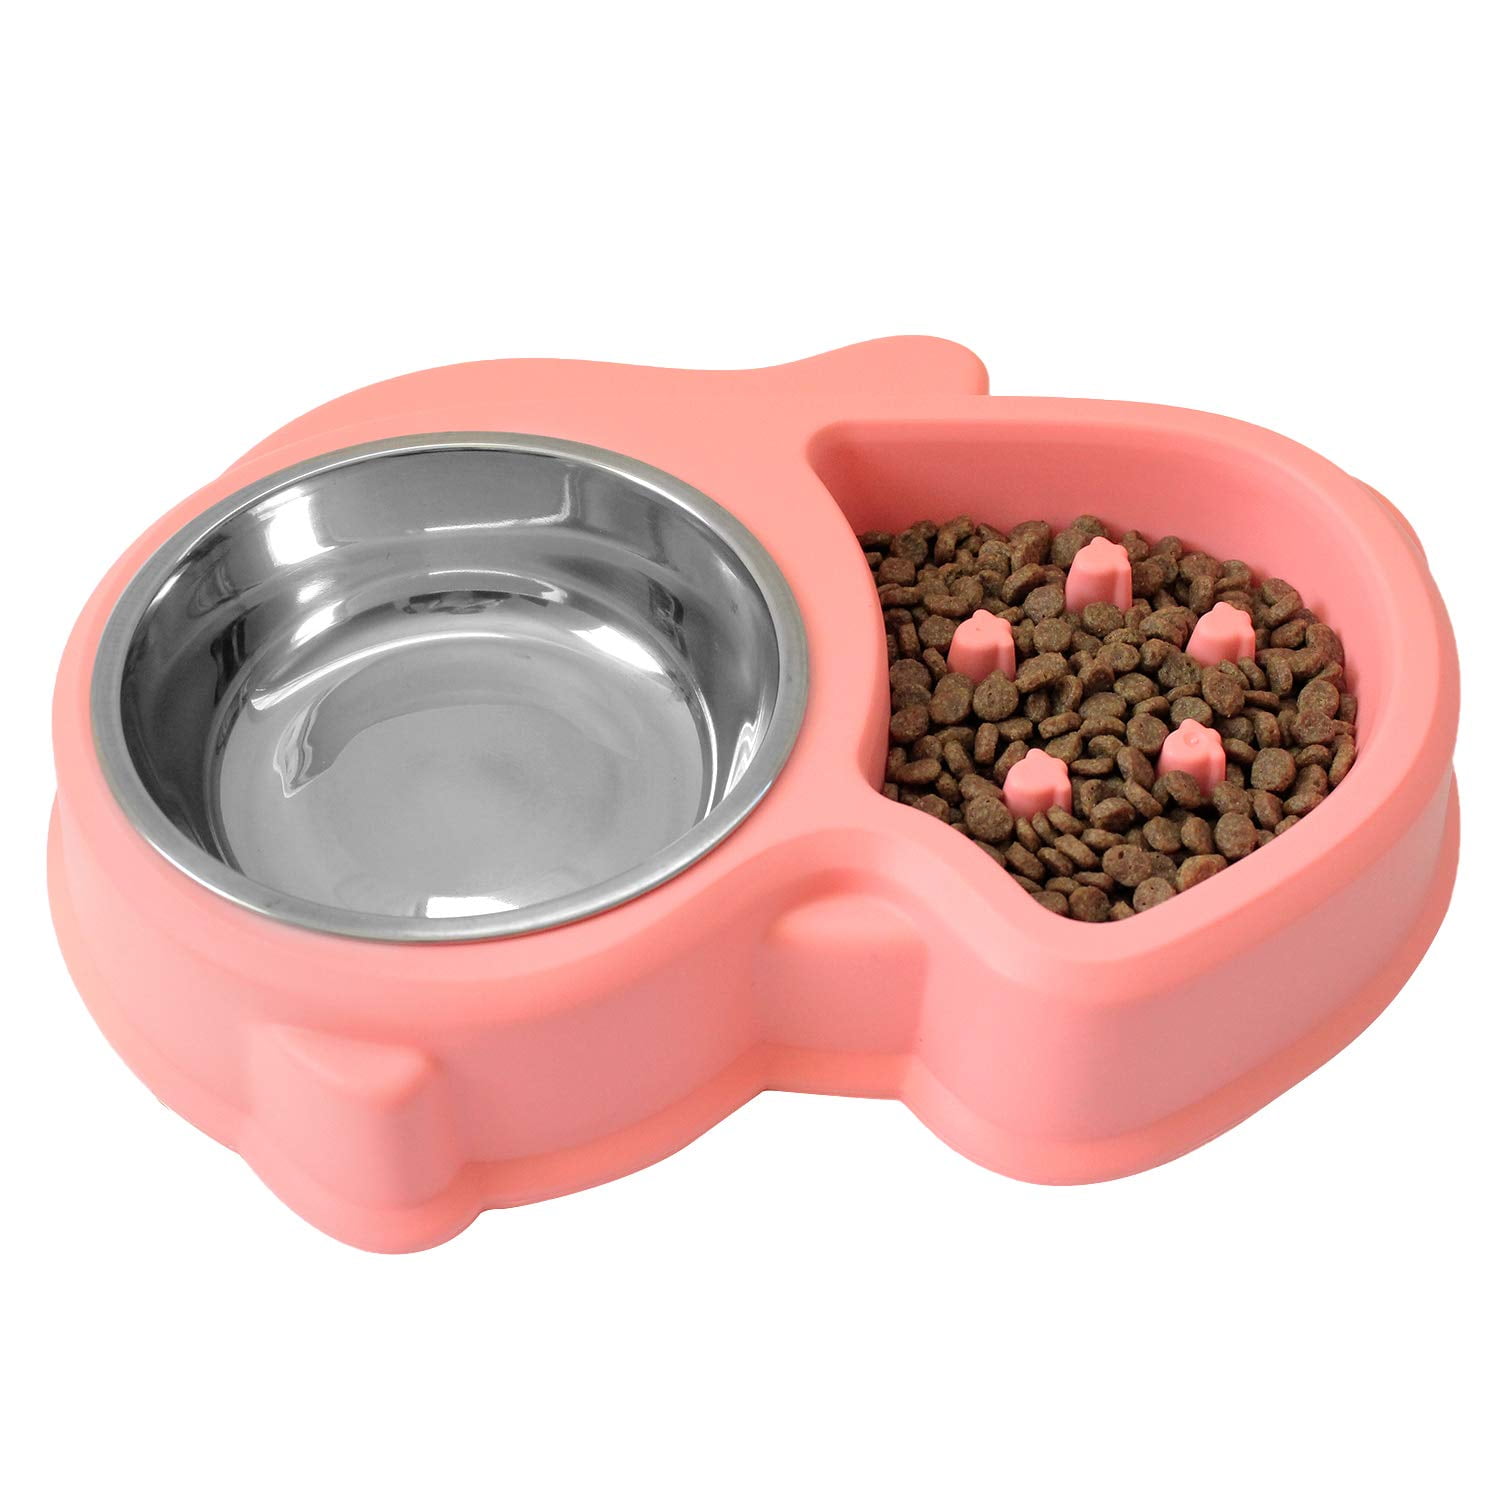 Slow Feed AntiChoke Pet Bowl Feeder with Stainless Steel